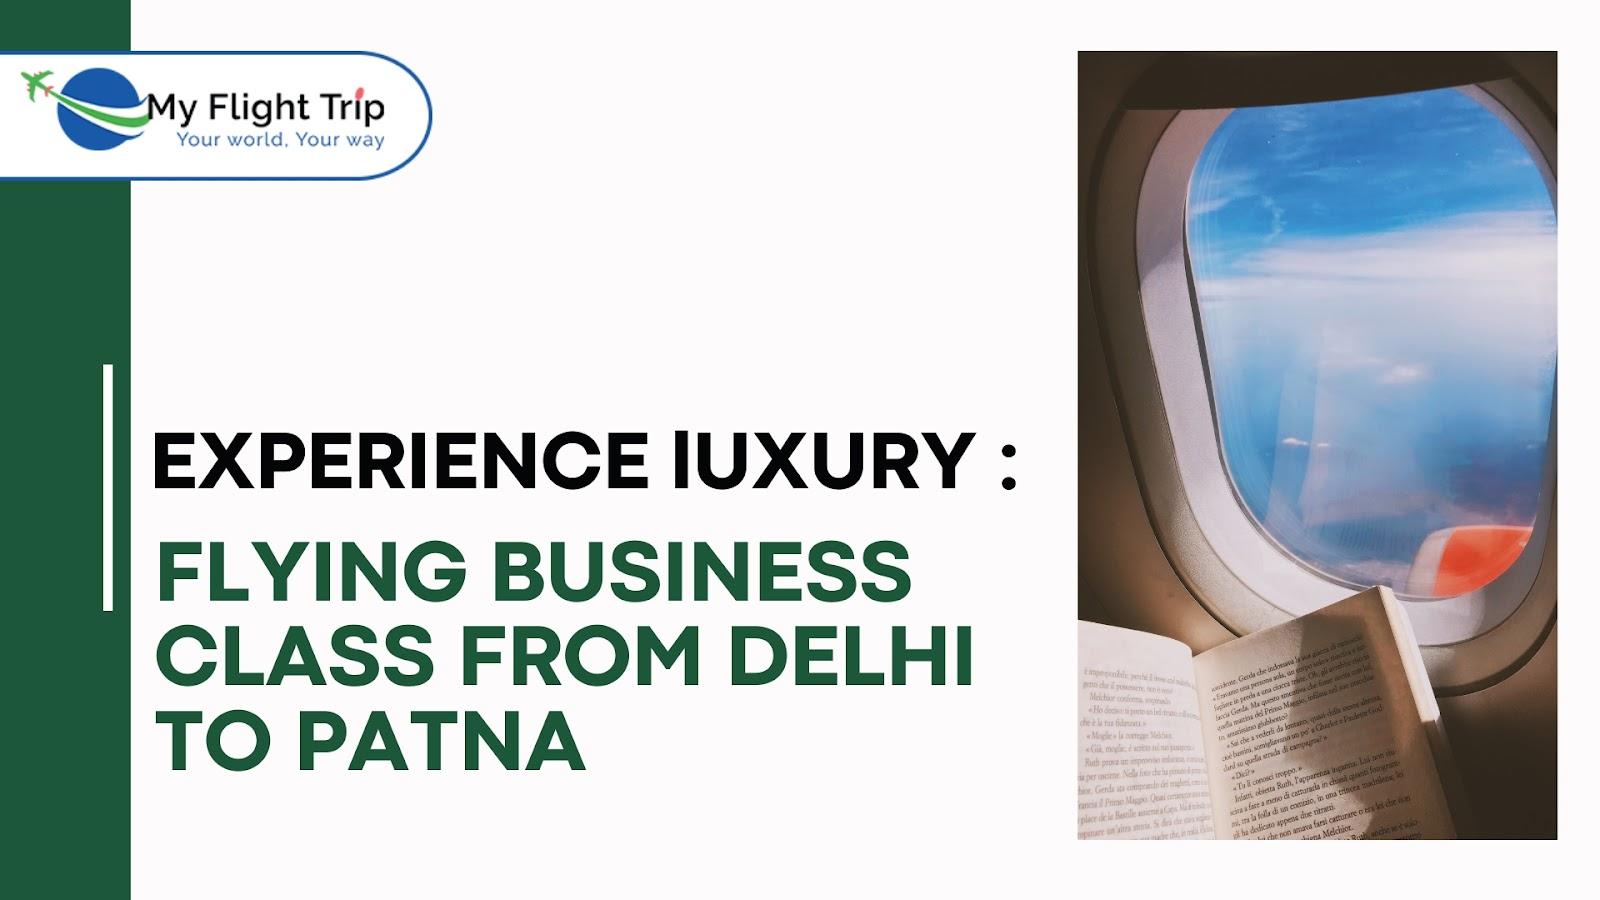 Flying Business Class from Delhi to Patna